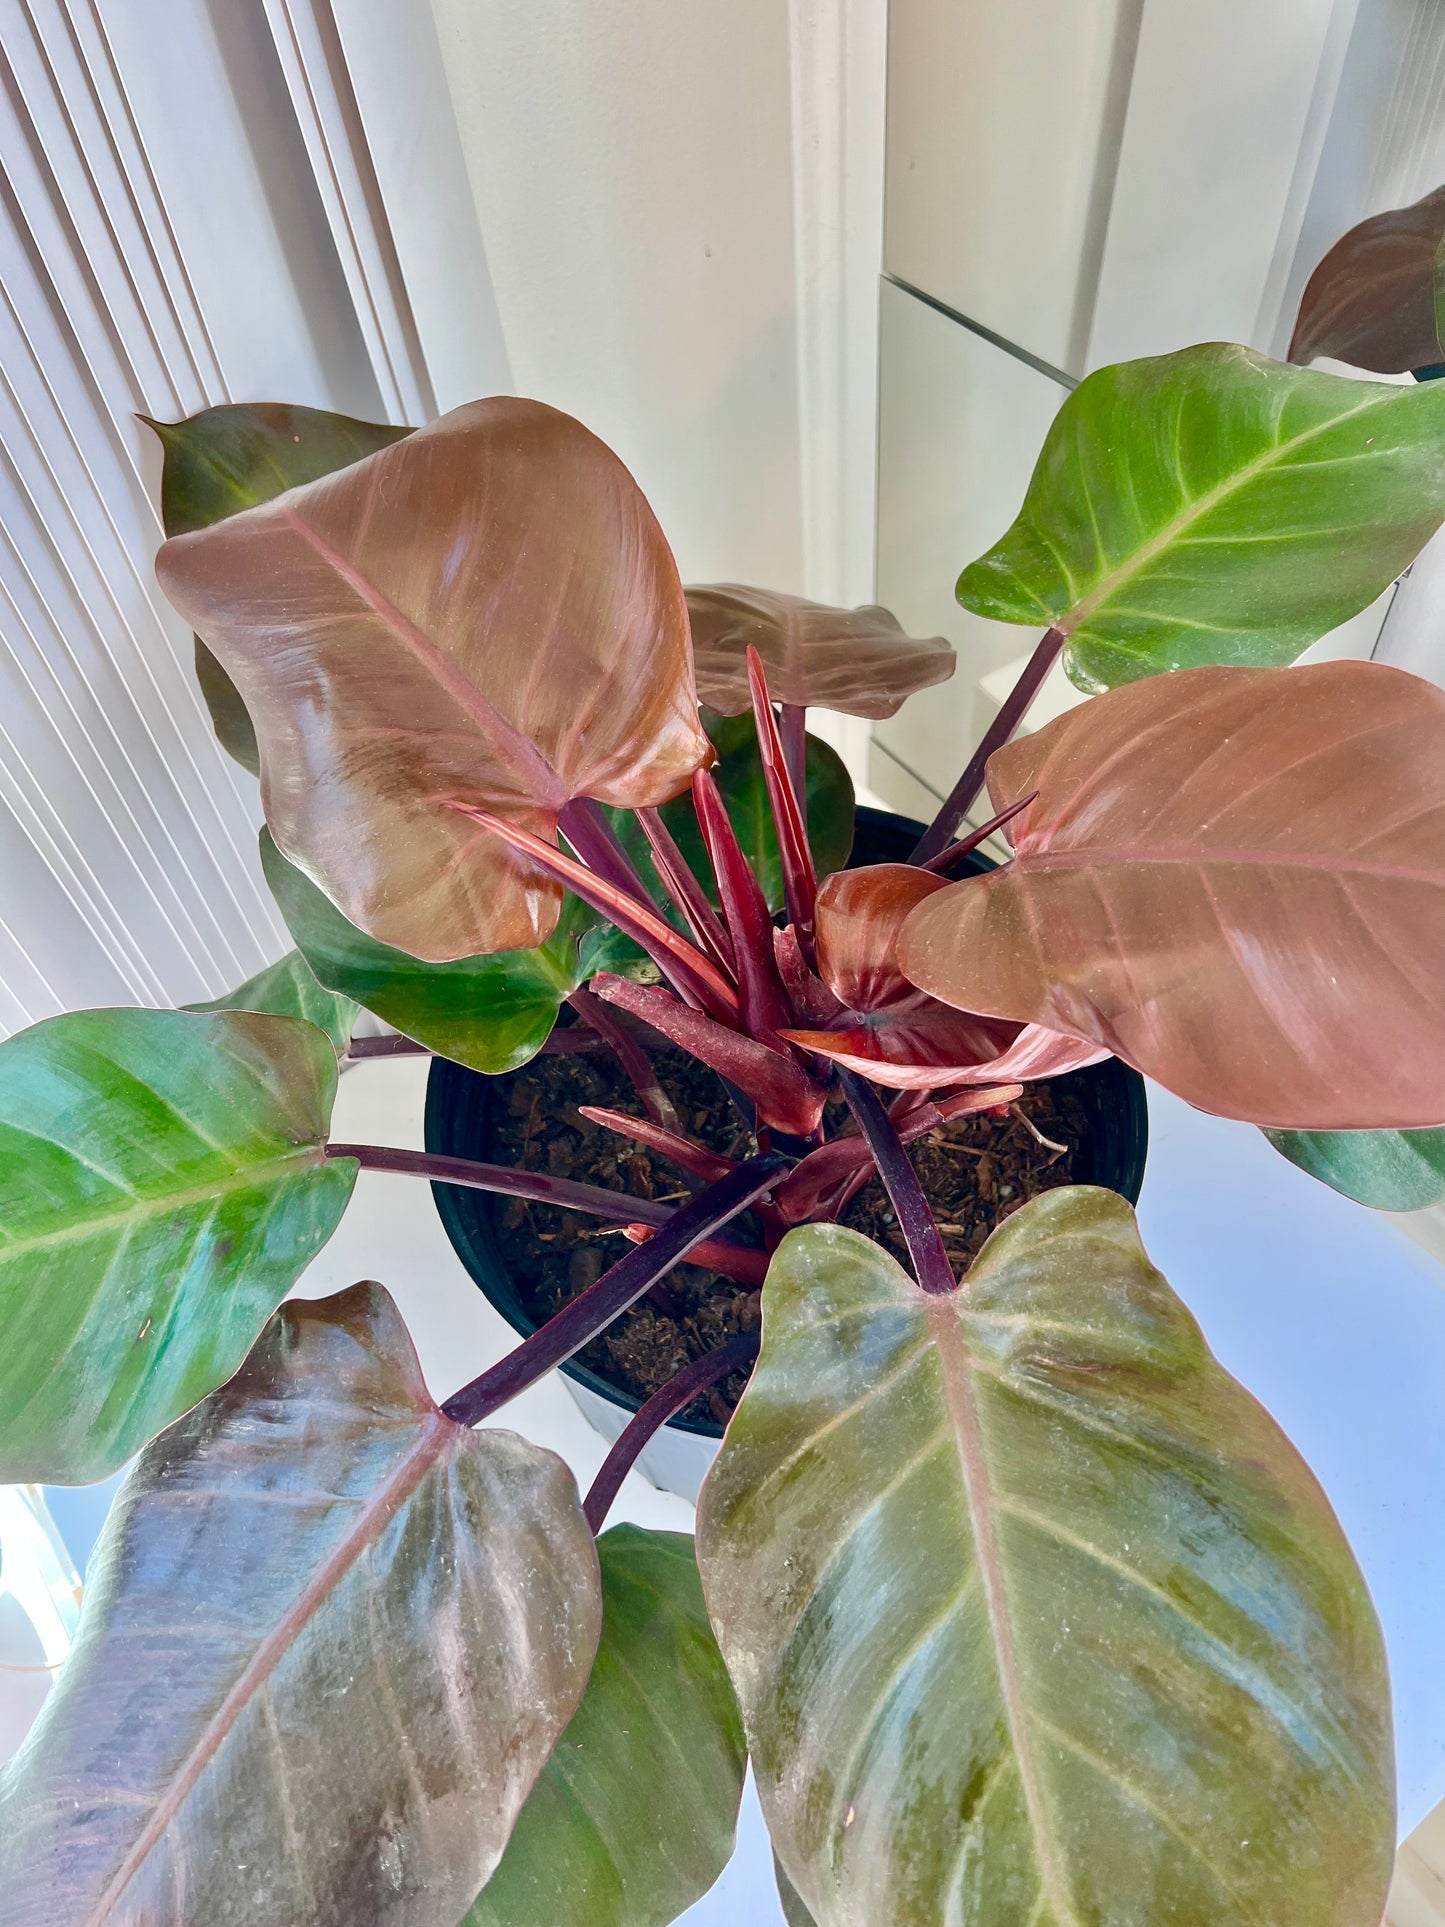 PHILODENDRON “MCCOLLEY’S FINALE“ - LARGE